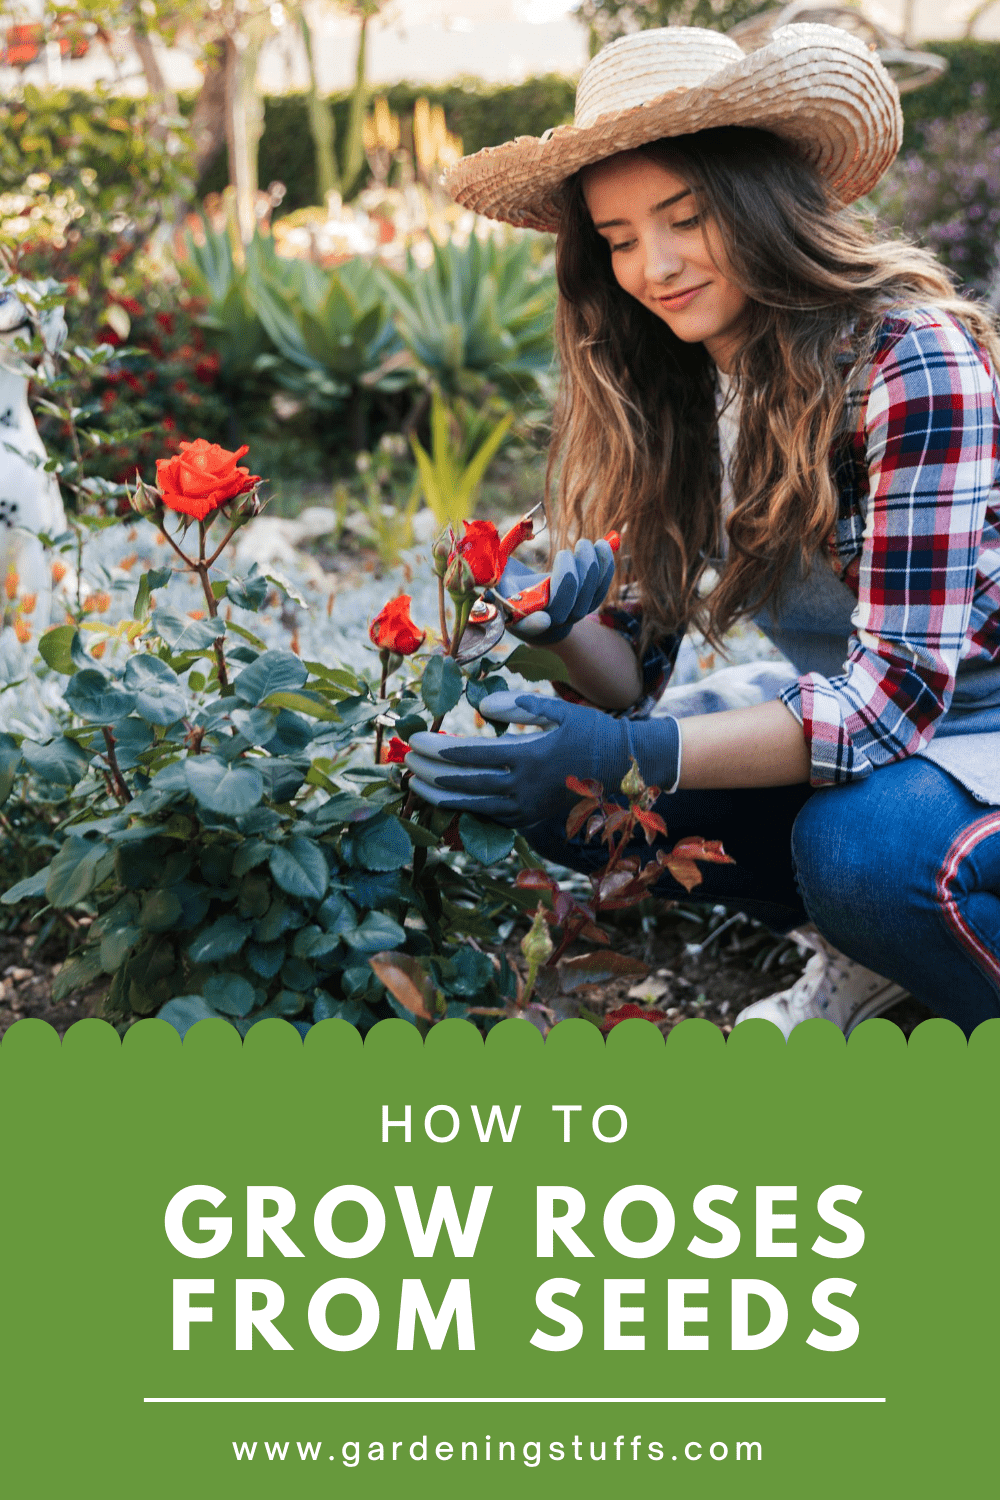 This is a step-by-step guide that'll walk you through the process of planting and growing healthy beautiful roses from seeds.